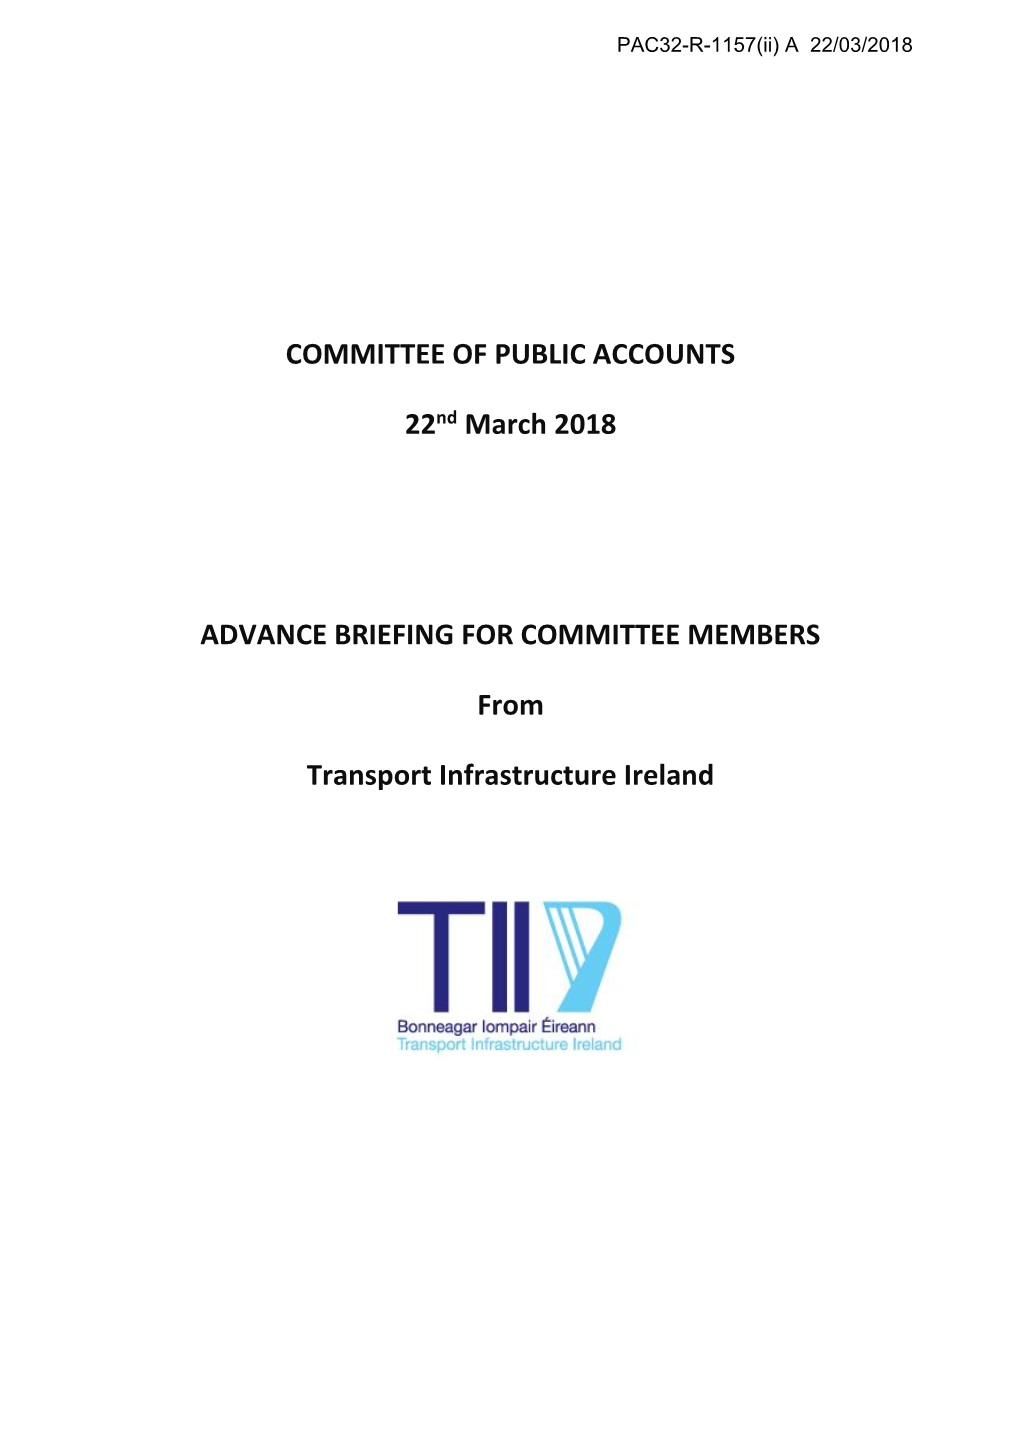 COMMITTEE of PUBLIC ACCOUNTS 22Nd March 2018 ADVANCE